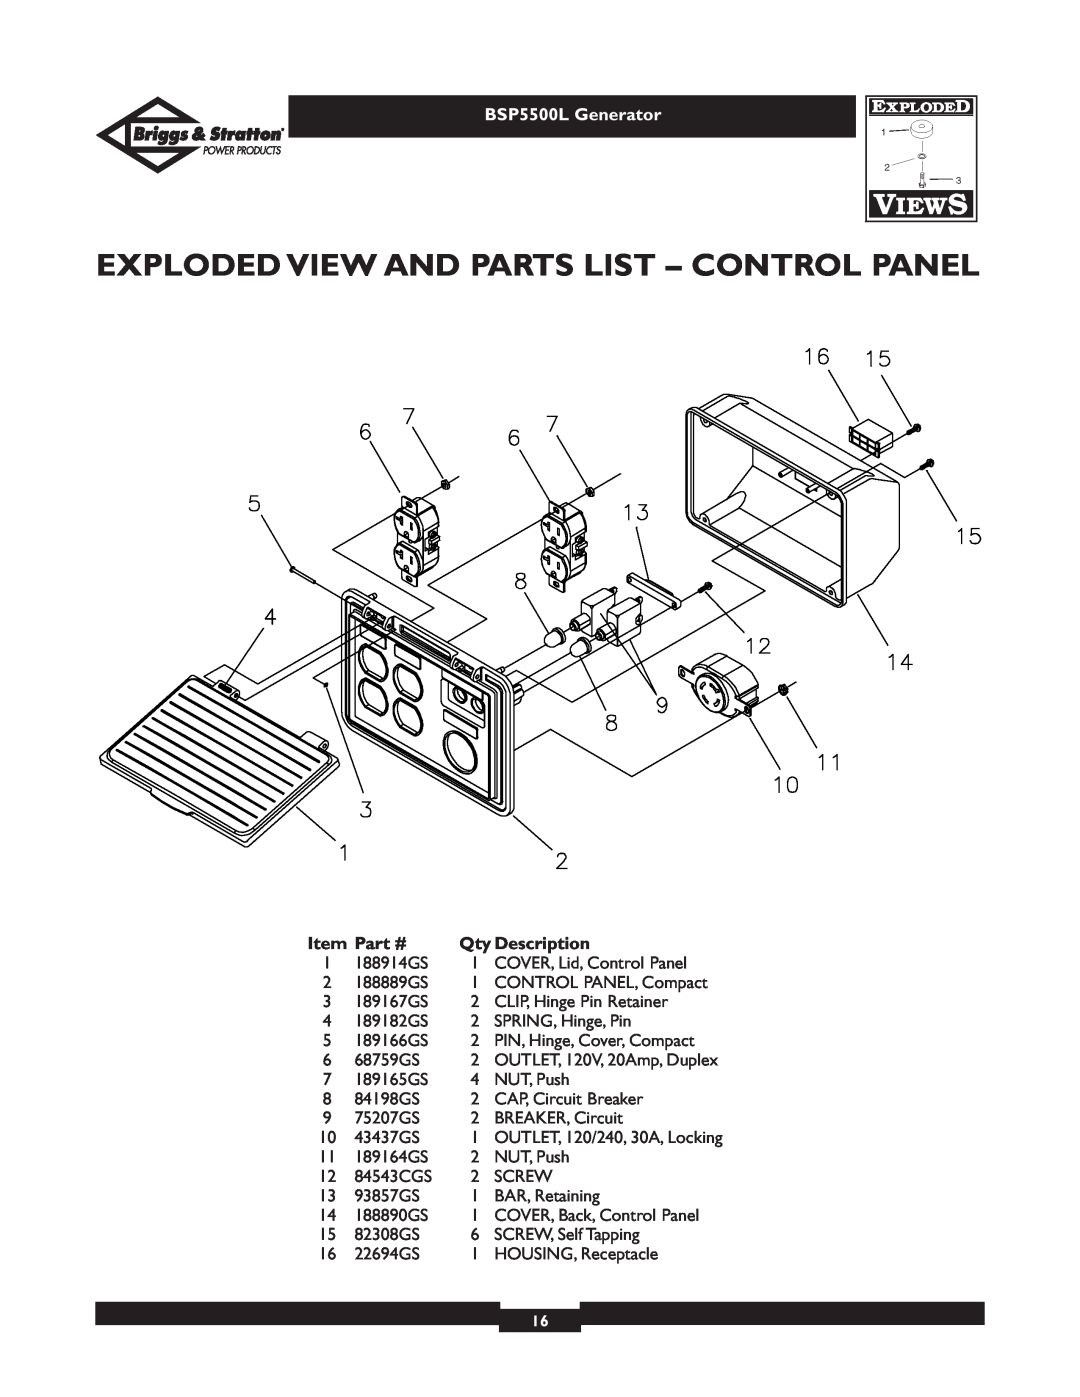 Briggs & Stratton bsp5500l owner manual Exploded View And Parts List - Control Panel, BSP5500L Generator 